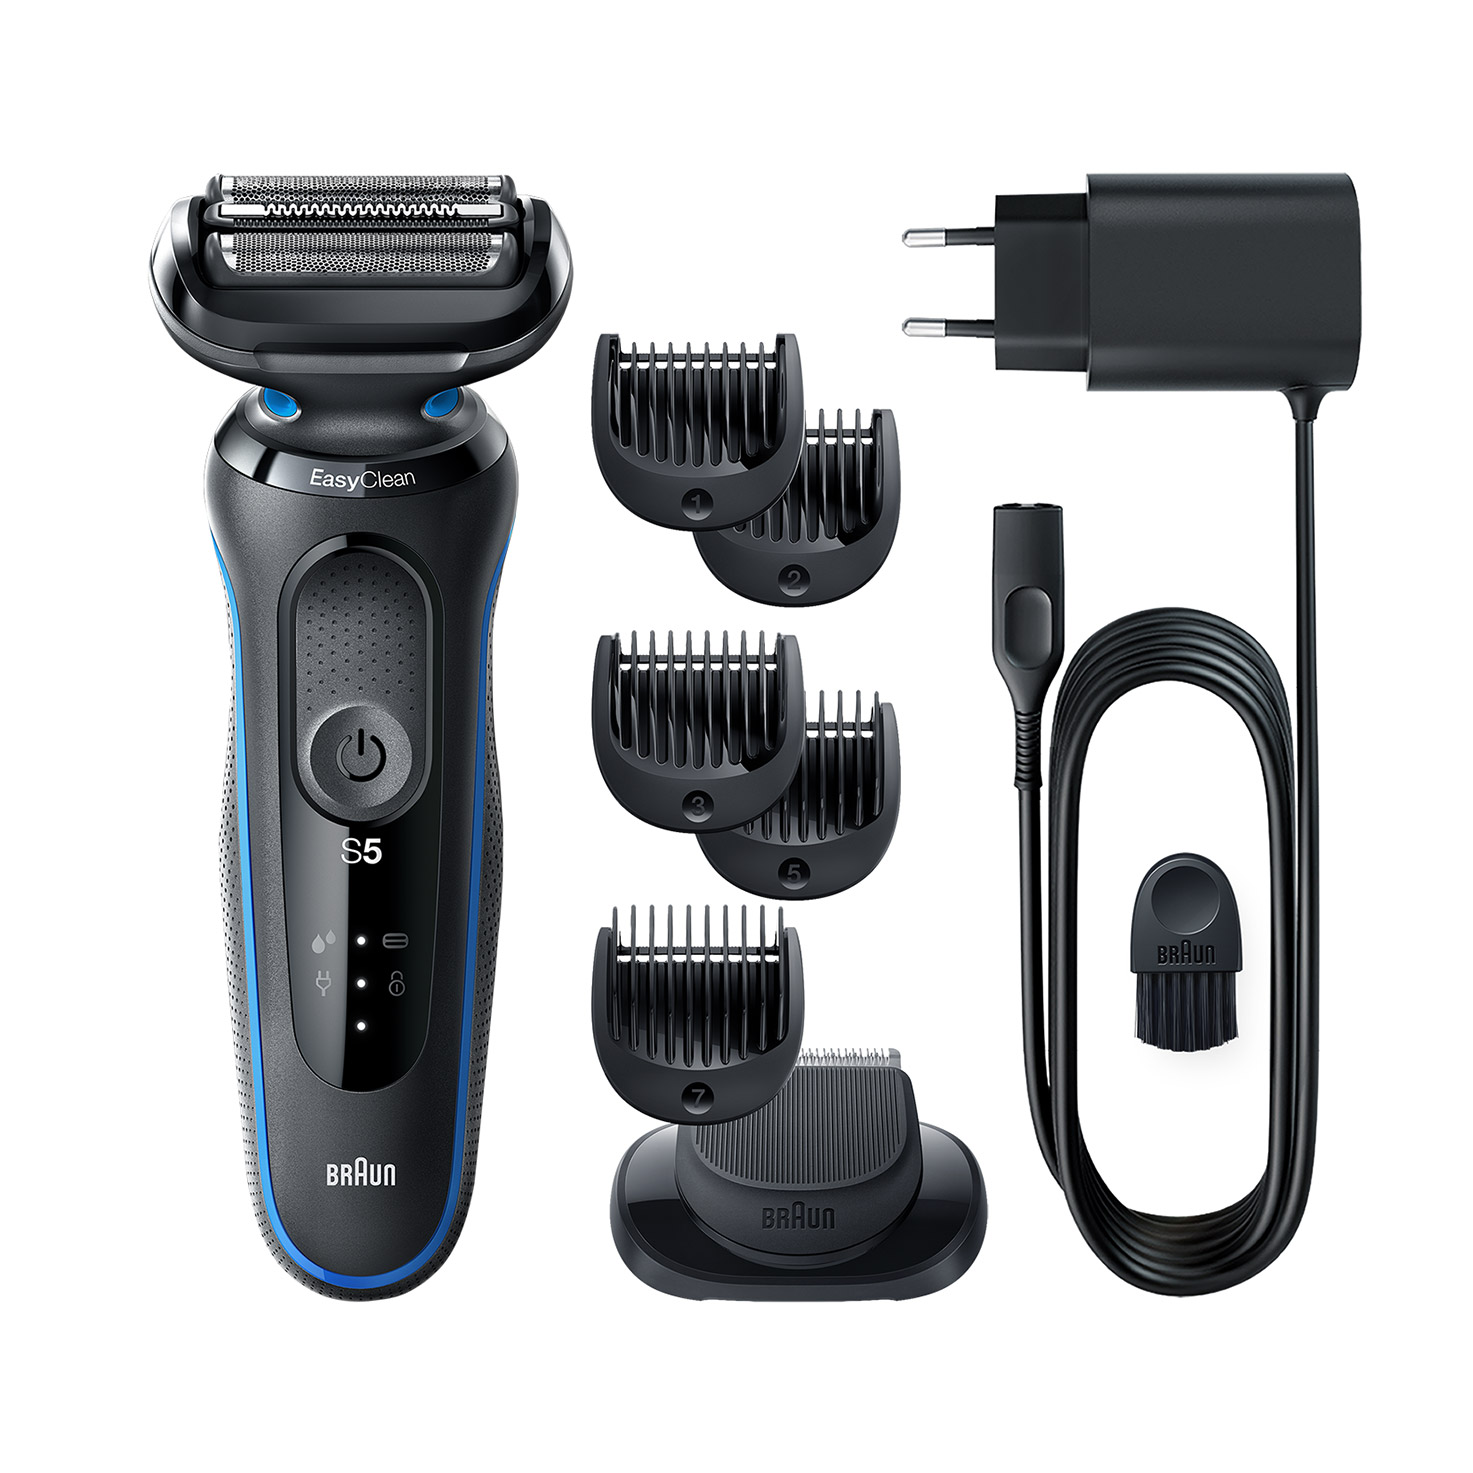 Series 5 51-B1500s Wet & Dry shaver with 1 attachment, blue.